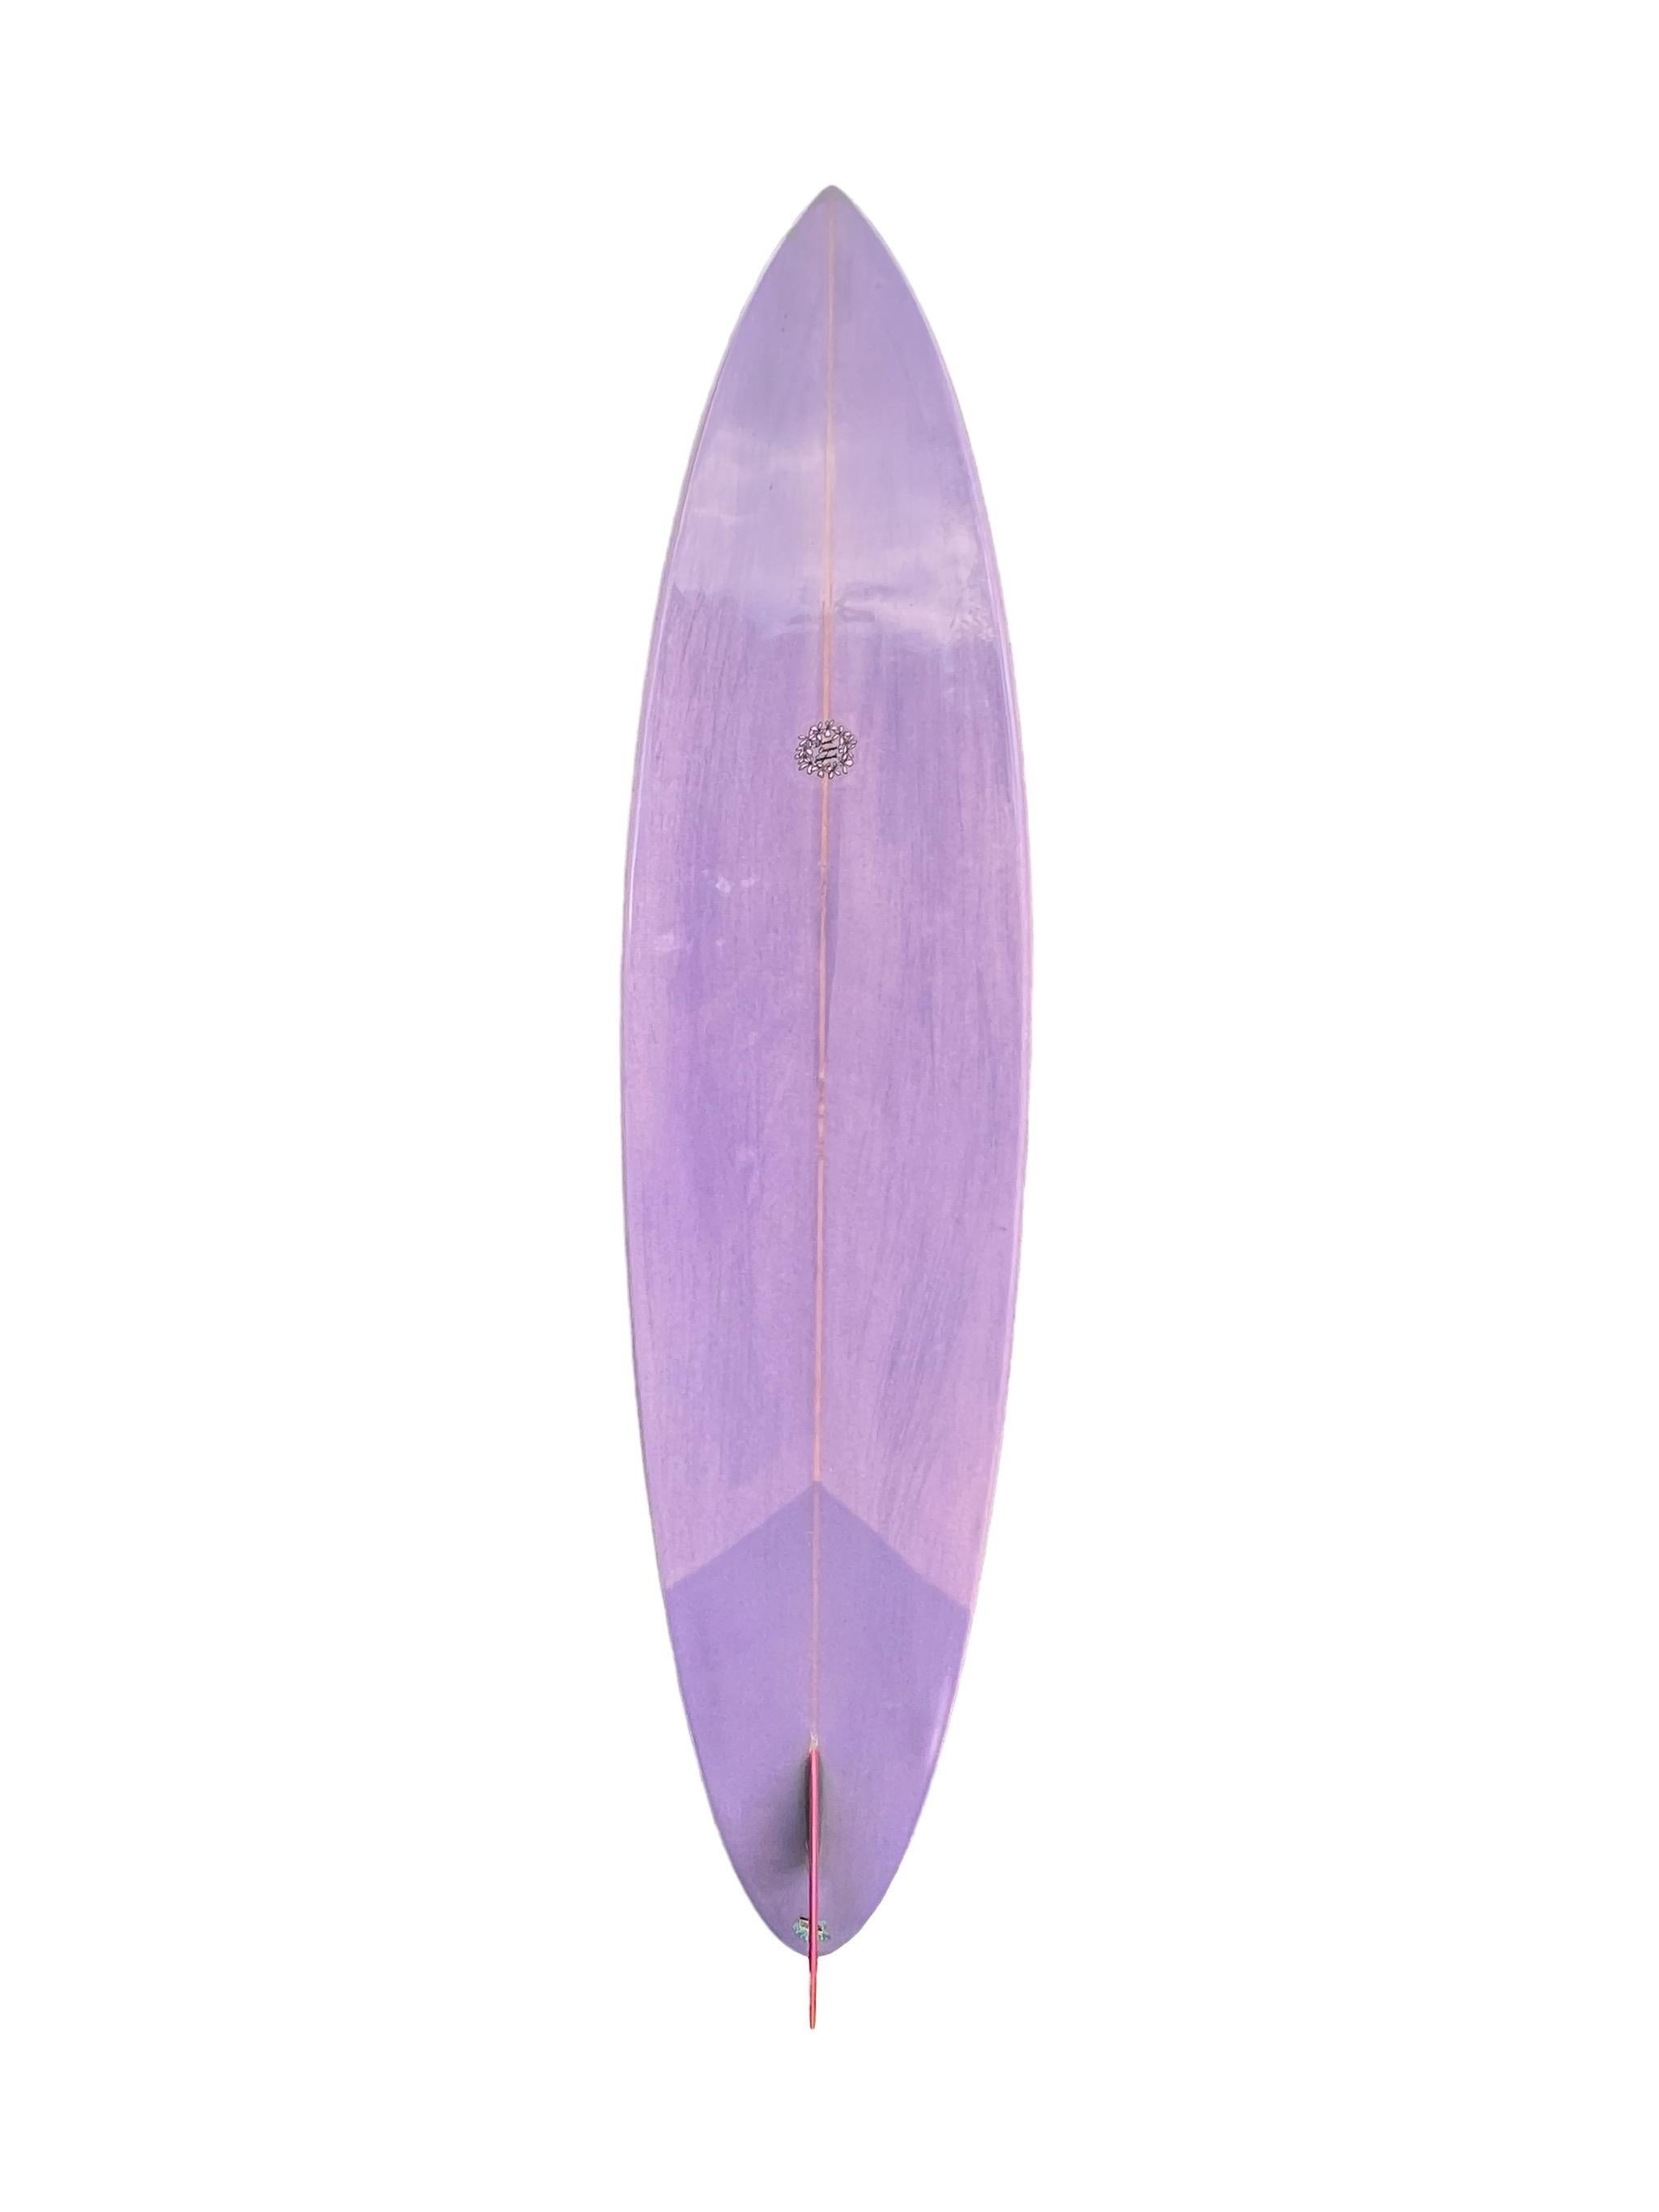 1970s Replica Owl Chapman Underground Hawaii pintail surfboard made in the early 2000s. Features beautiful amaranth and purple stain with complimentary glass-on single fin. Dual pinstripes with vintage 1970s Owl Chapman Underground Hawaii laminate.